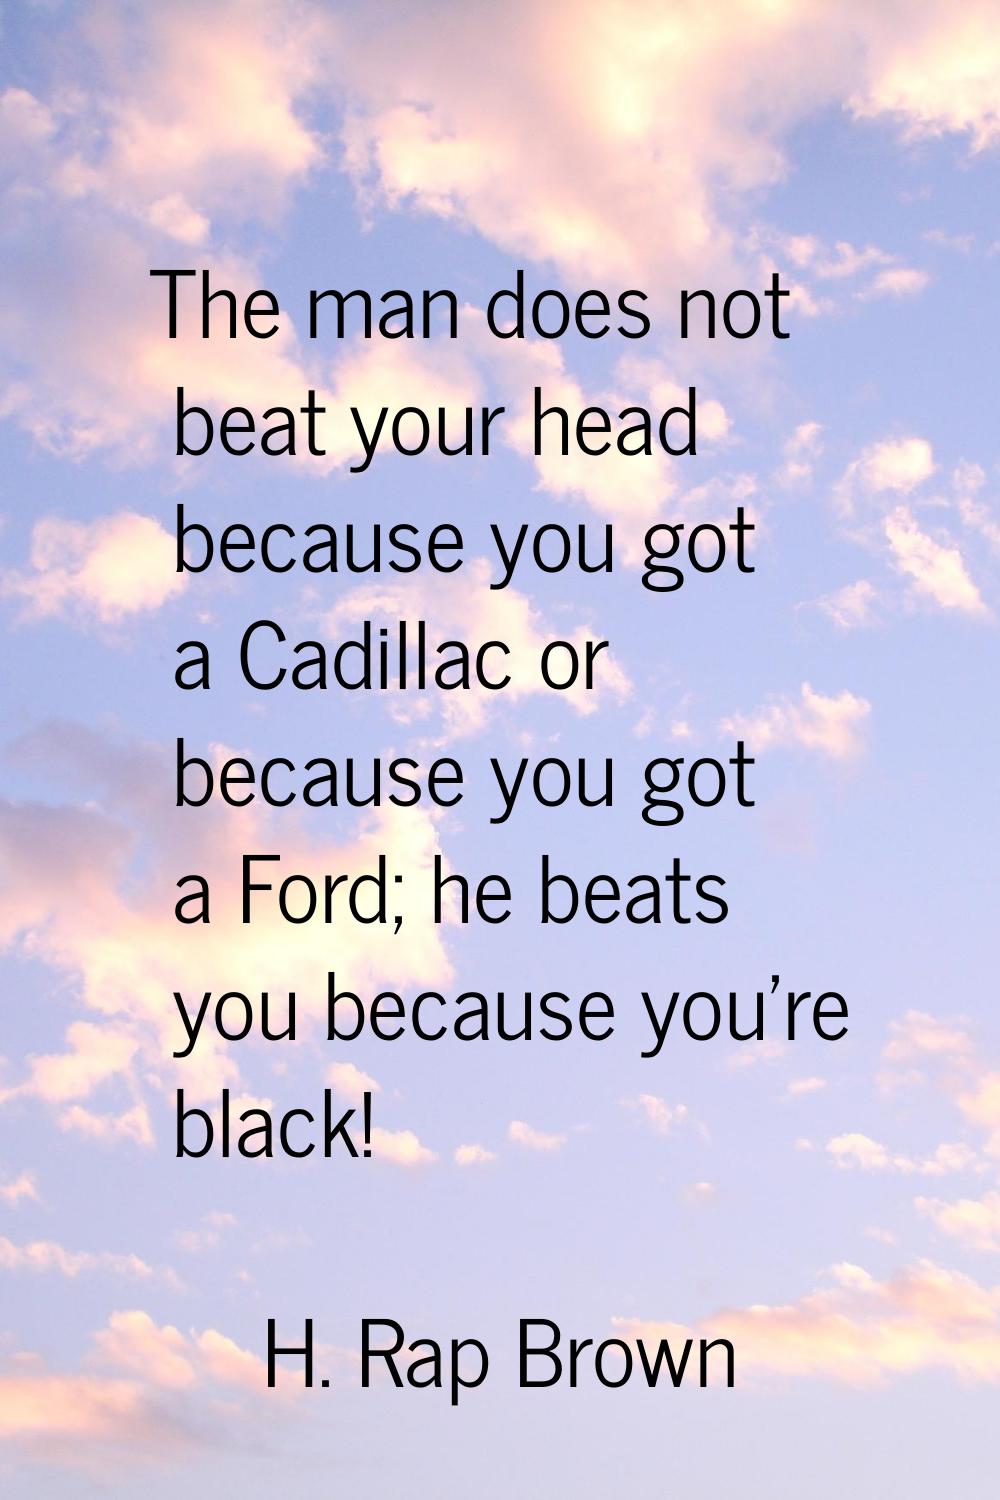 The man does not beat your head because you got a Cadillac or because you got a Ford; he beats you 